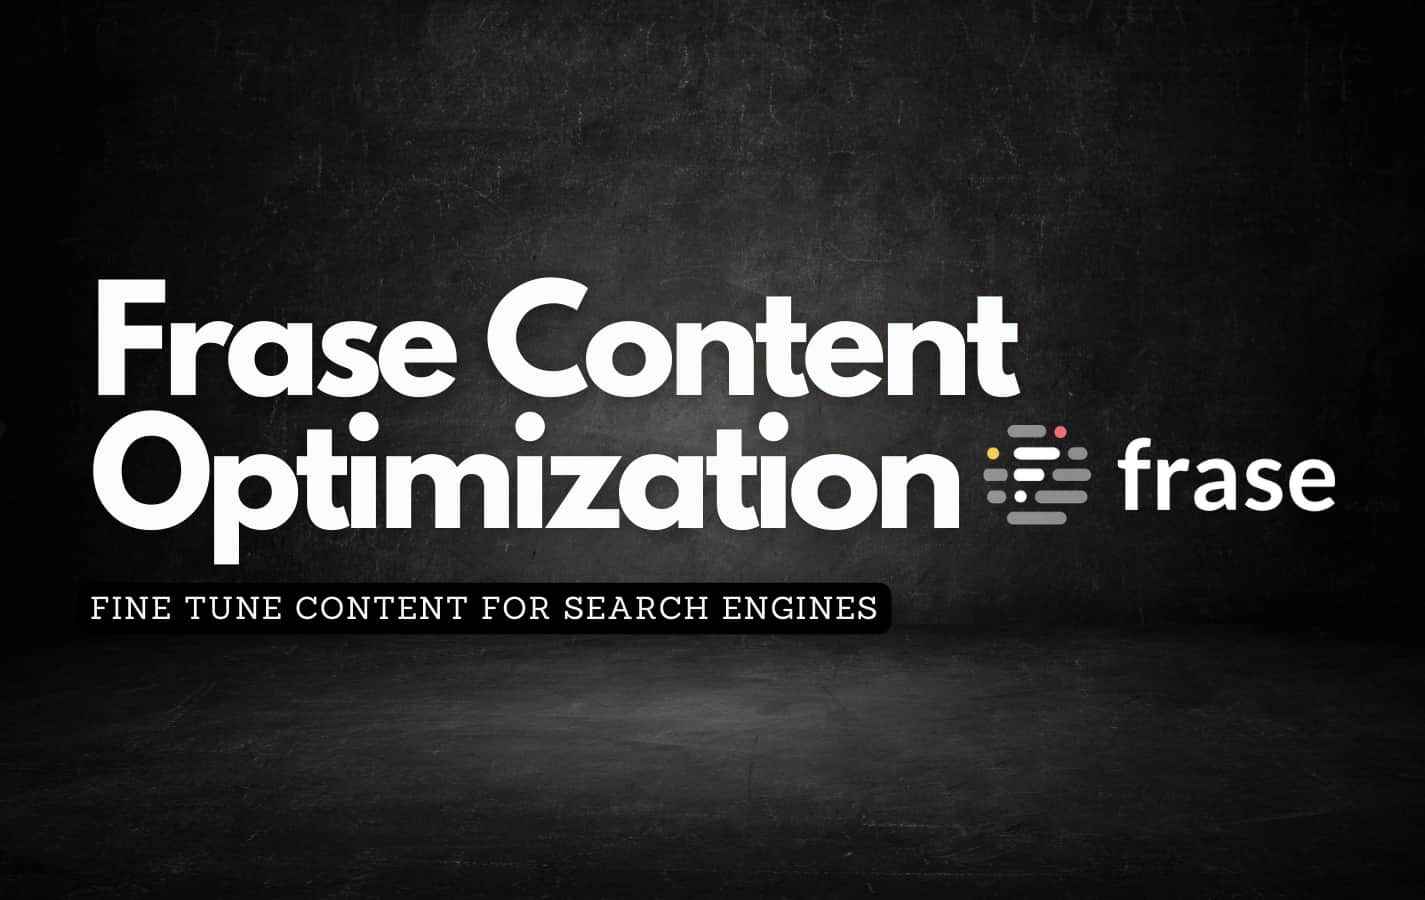 Frase logo against a dark background with the text overlay about optimizing content for Search Engines using Frase